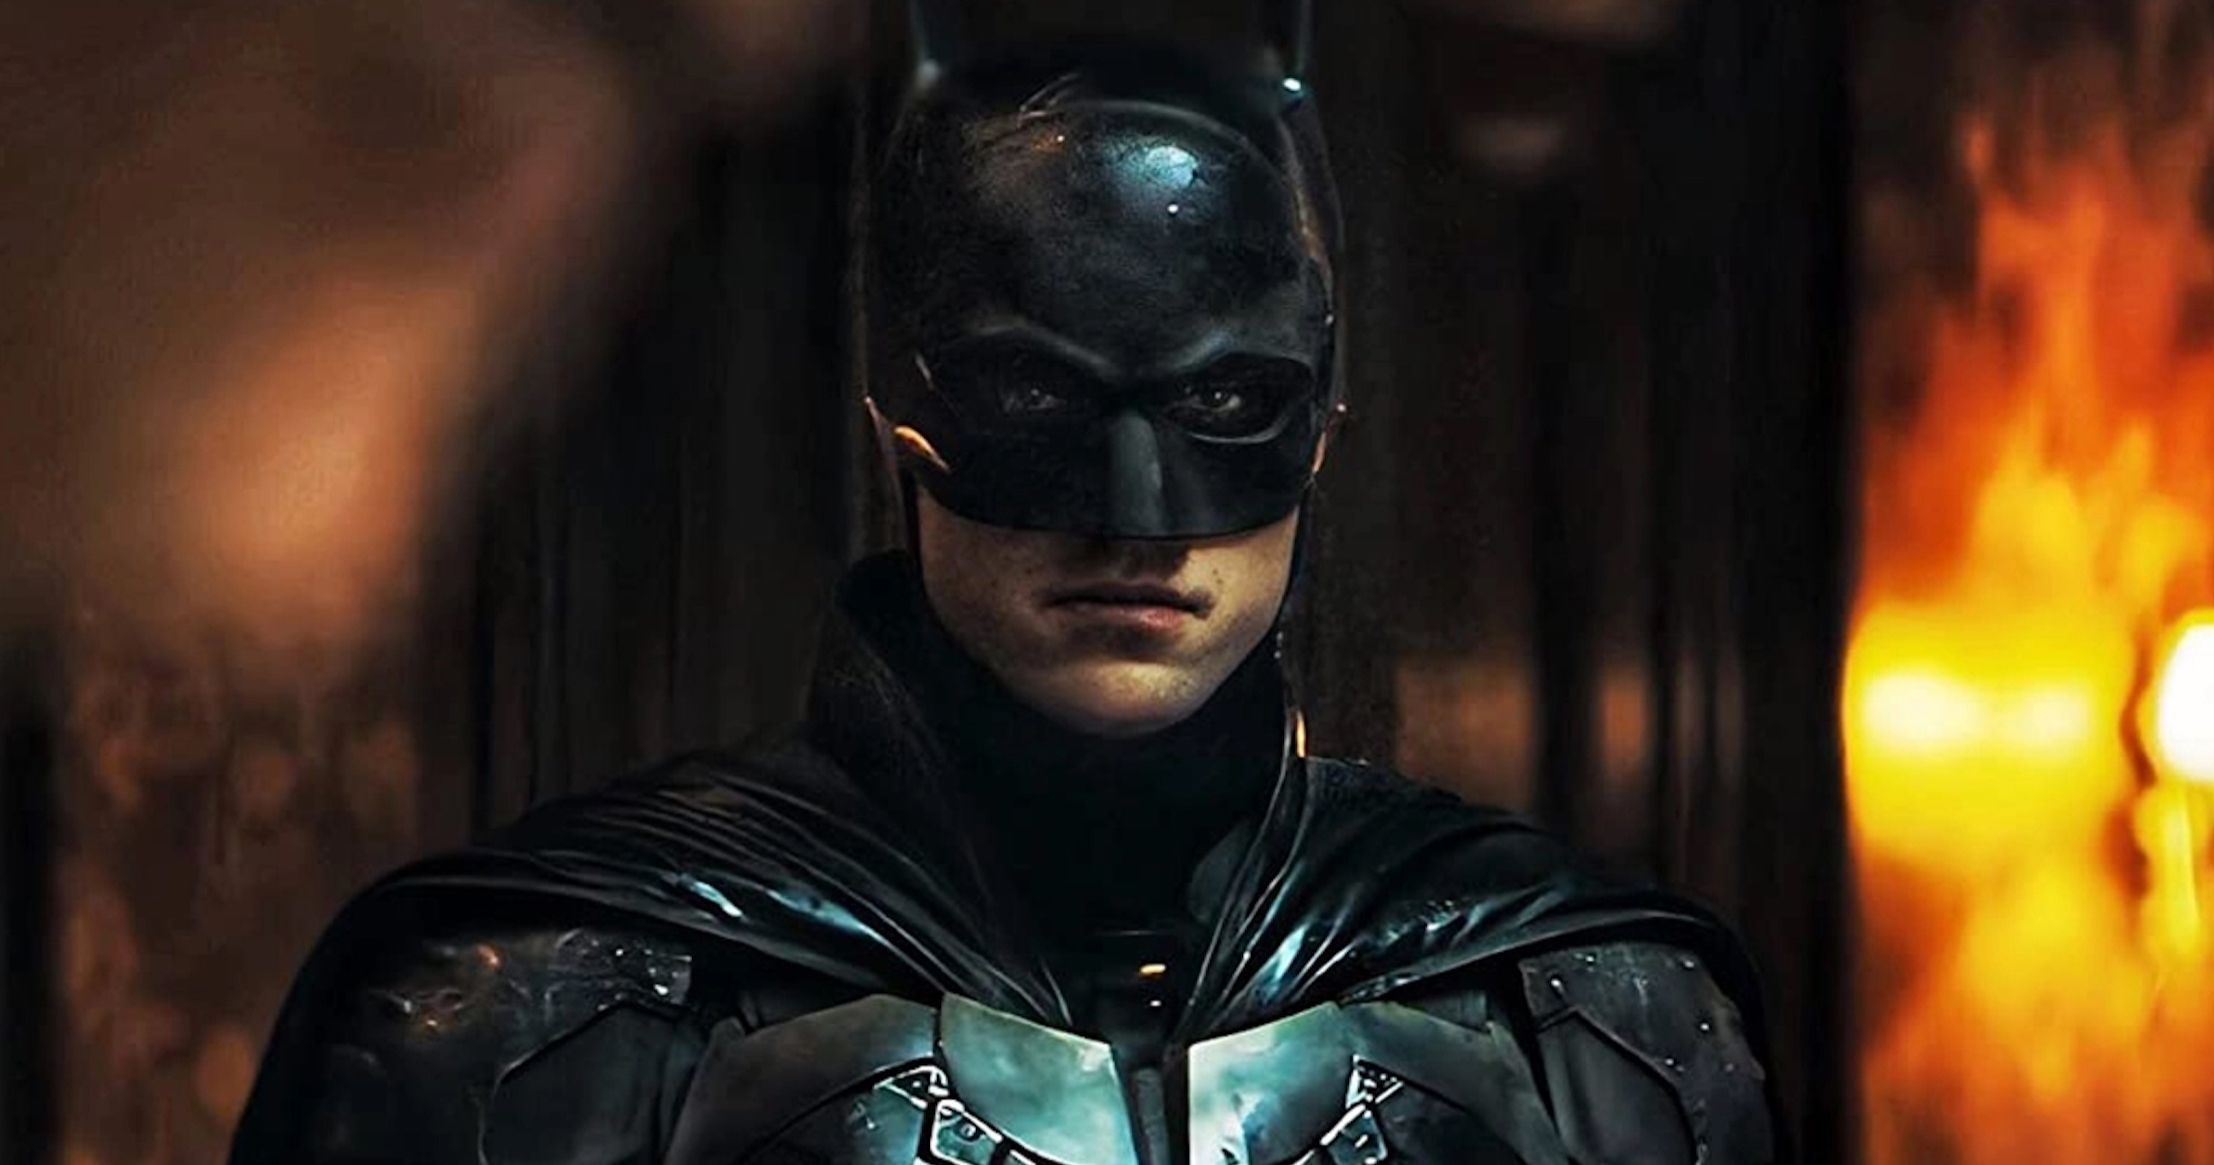 The Batman Is on Target to Wrap This March Following a Prolonged Filming Schedule